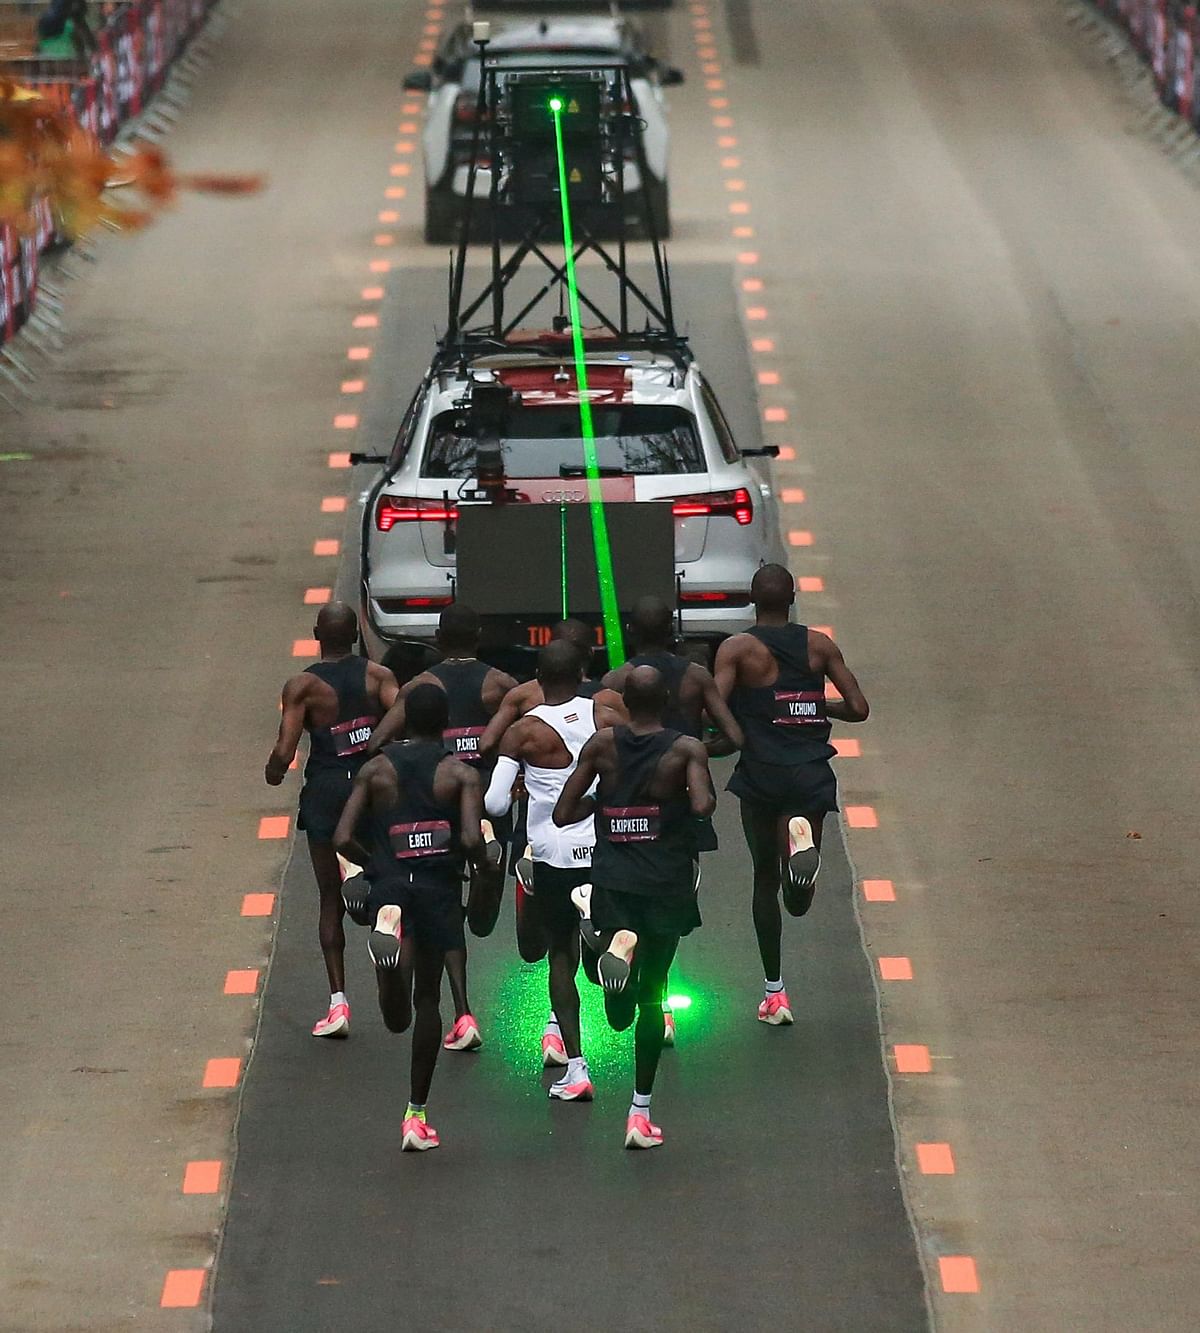 Eliud Kipchoge became the first athlete to run a marathon in less than two hours.